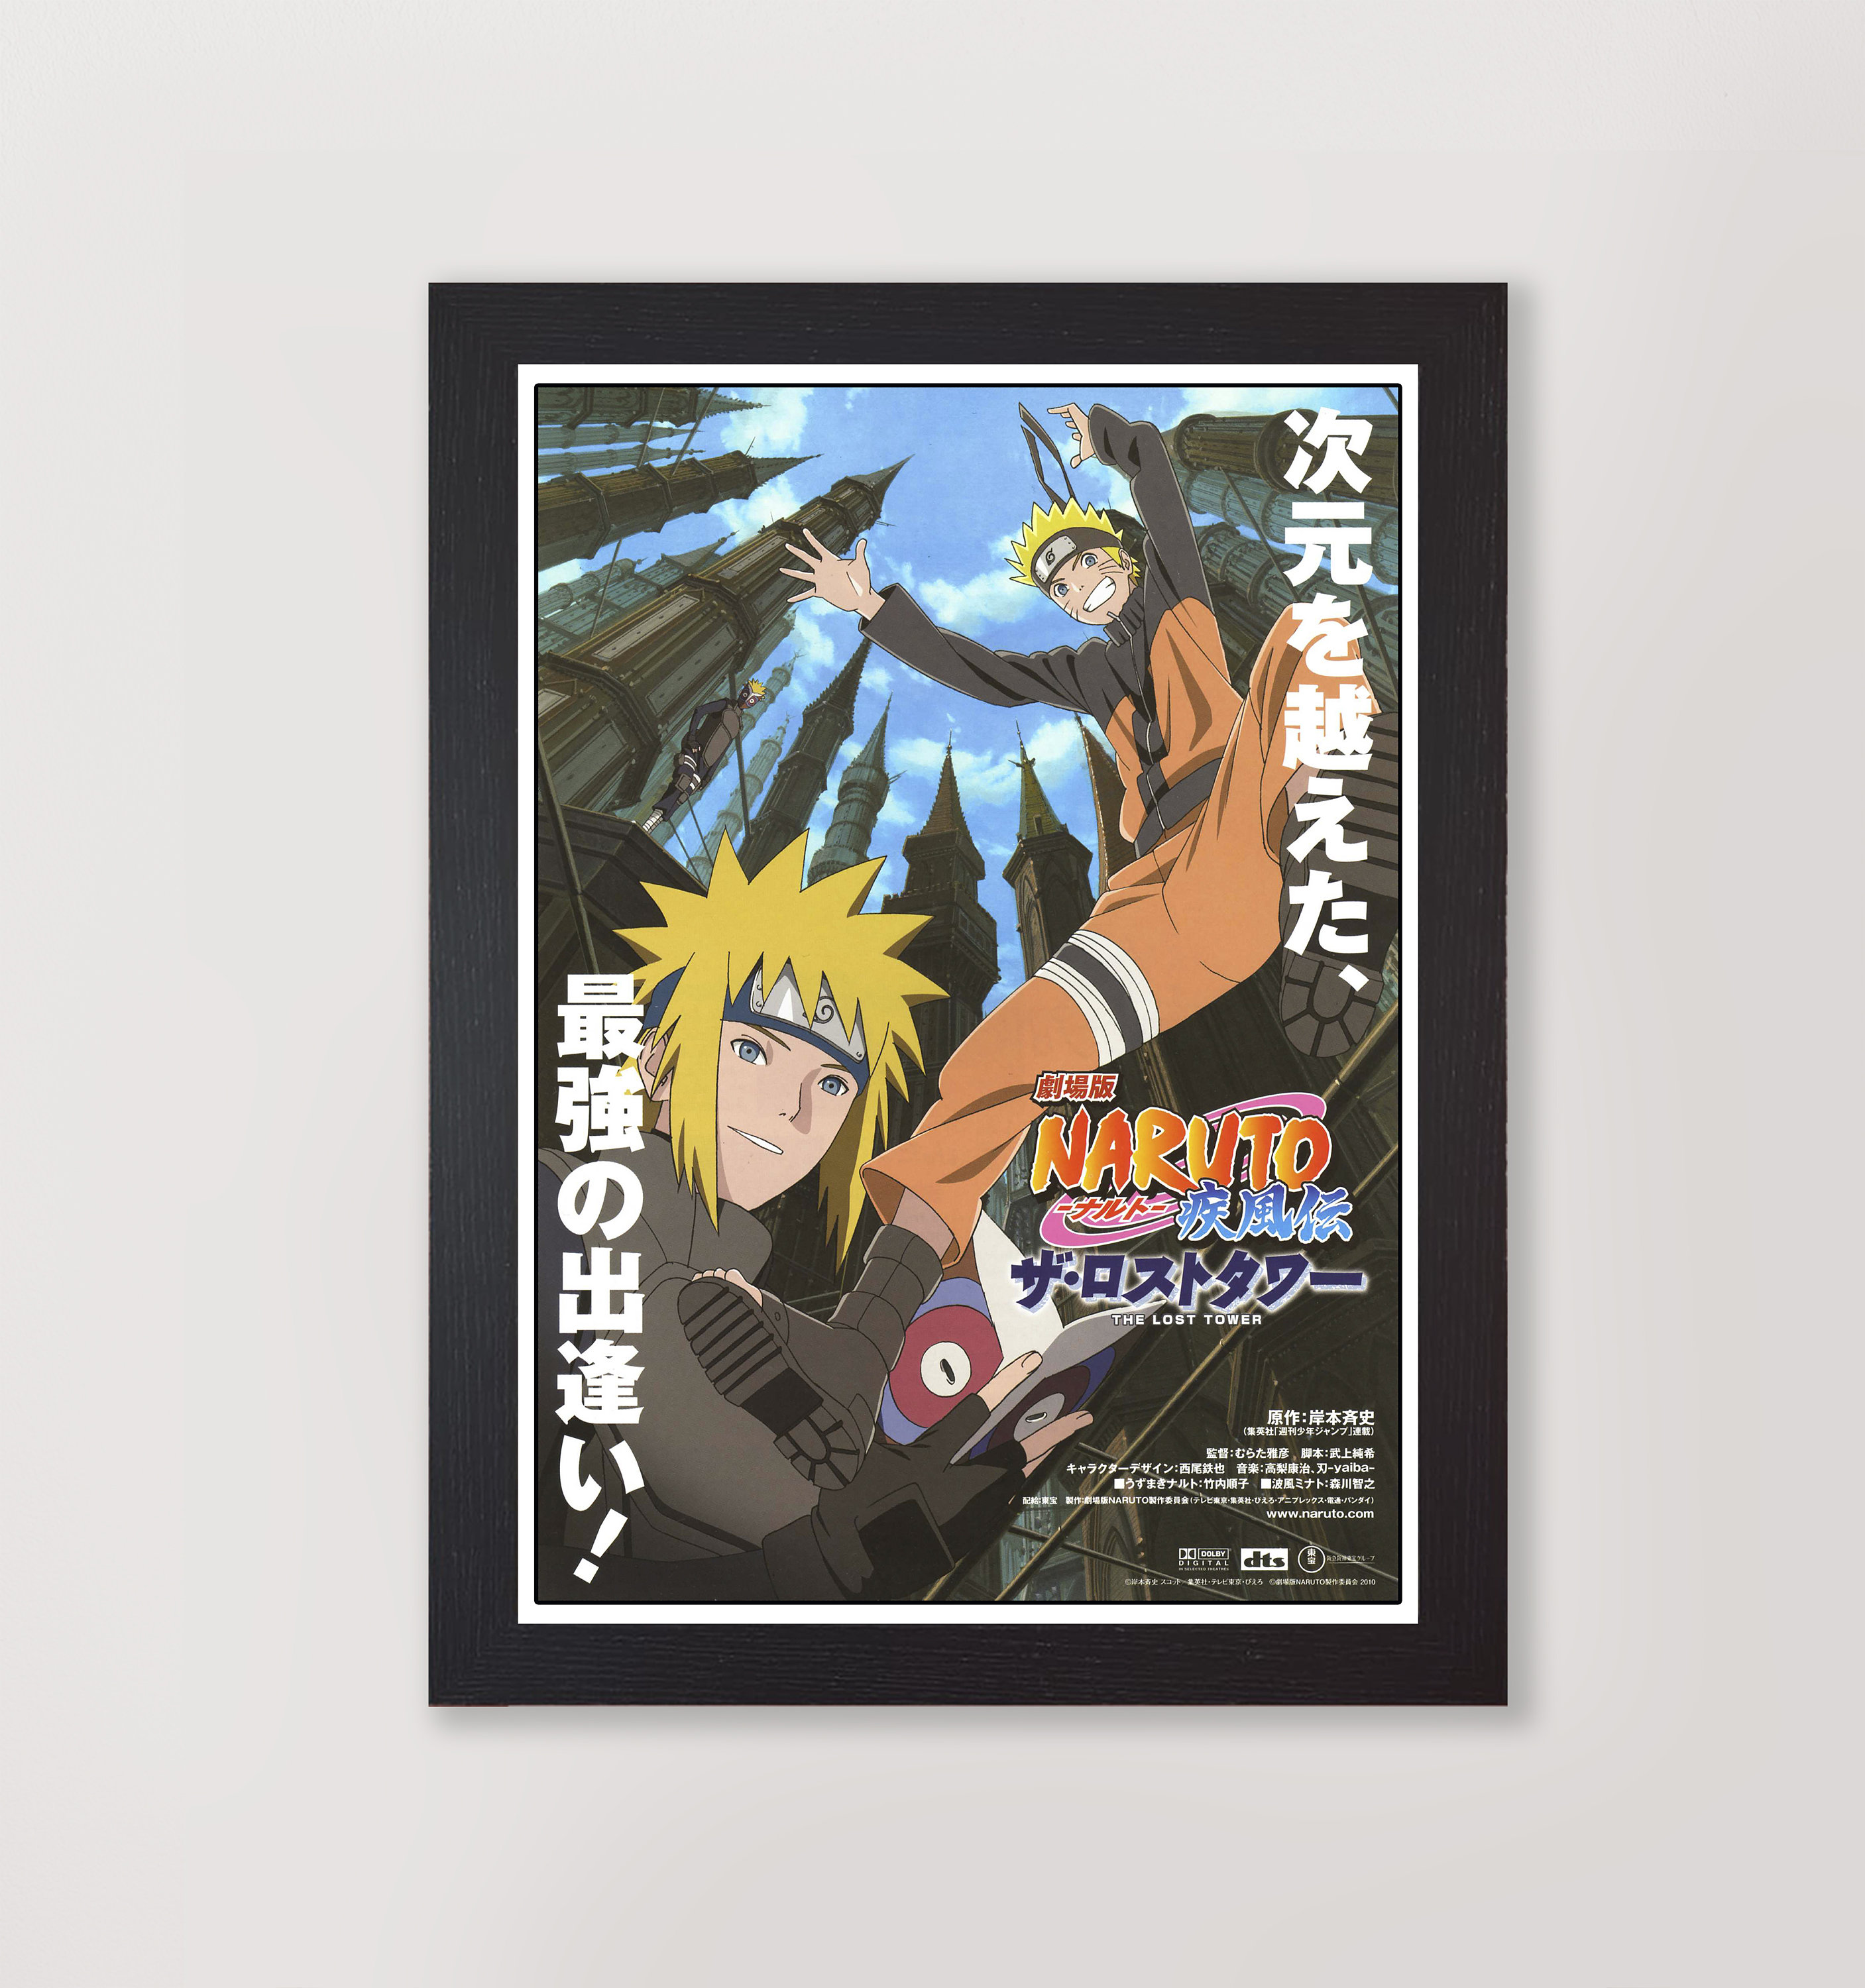 Framed Naruto Japanese Movie Poster Reproduction Print Anime Wall Art 